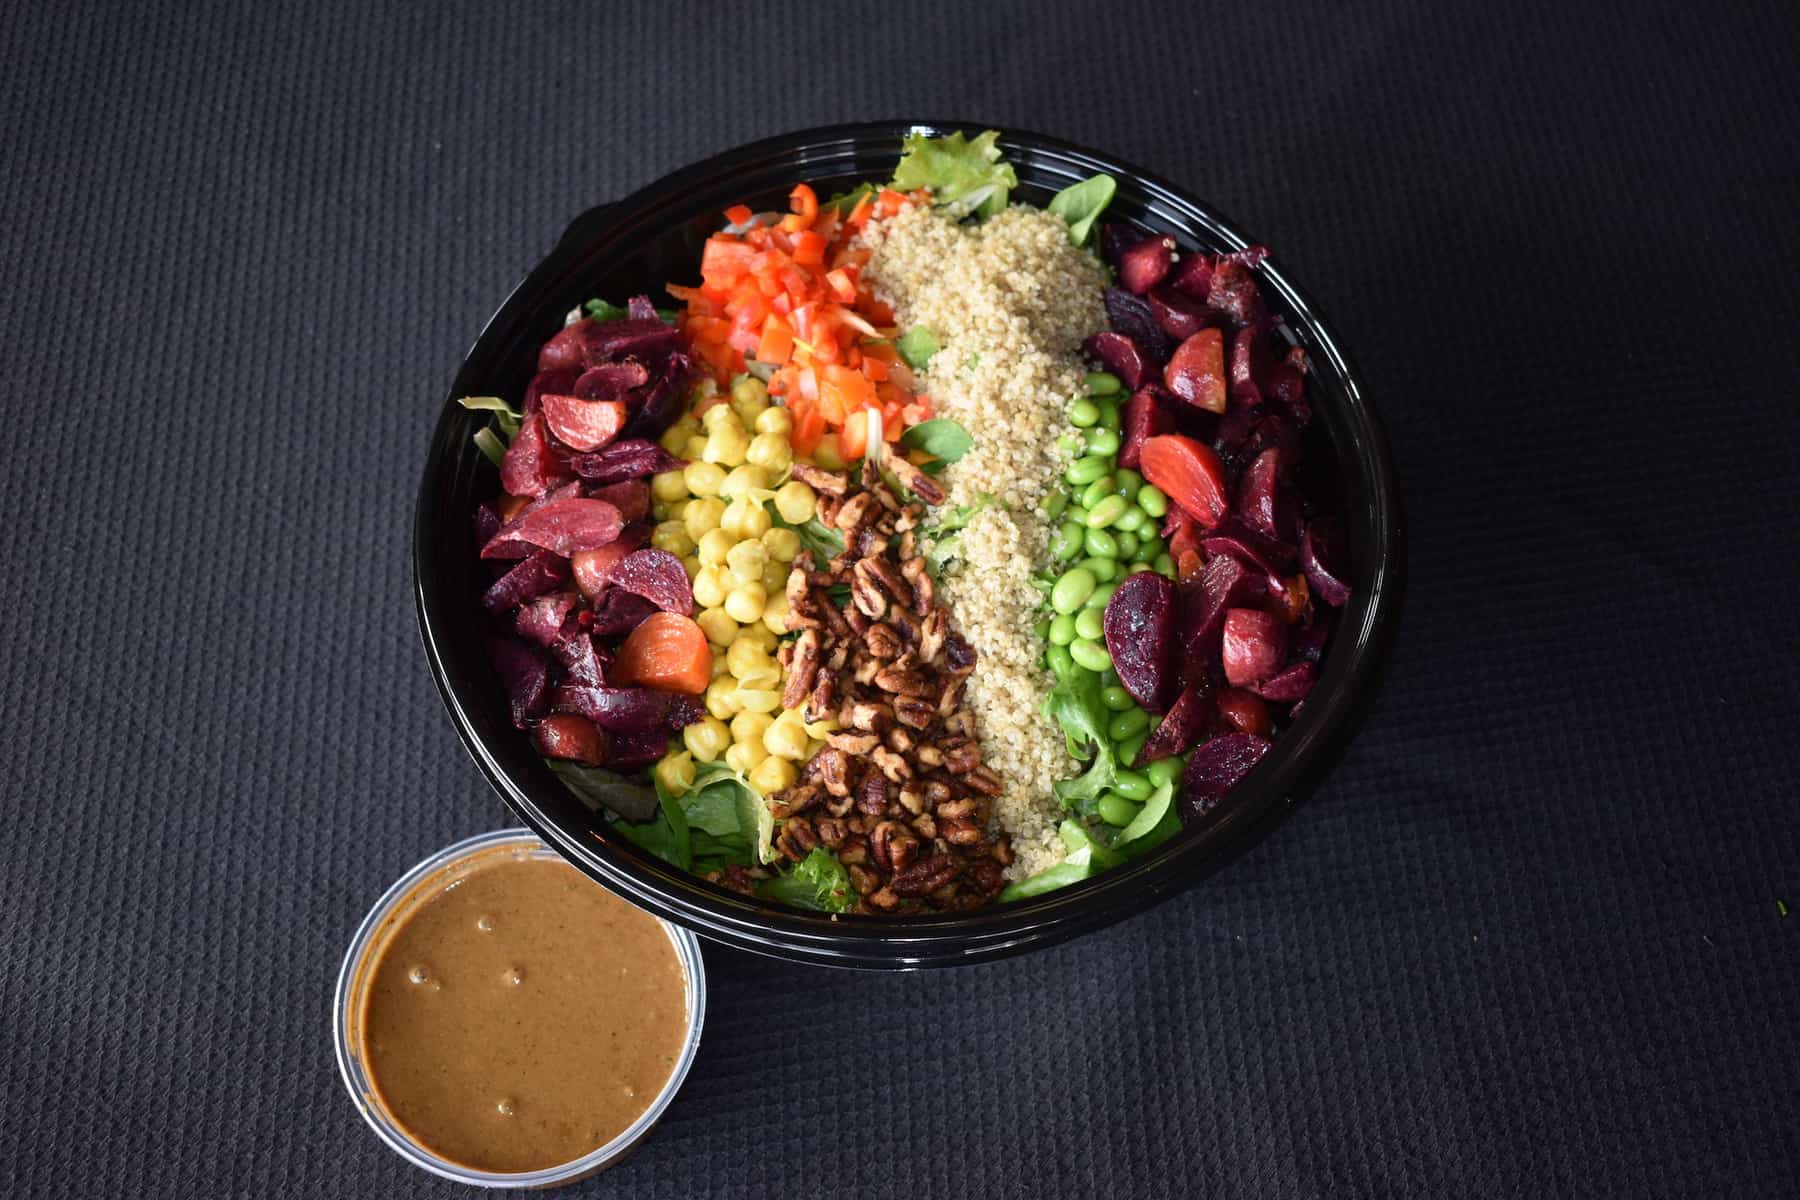 Featured image for “Beet Quinoa Shareable Salad”